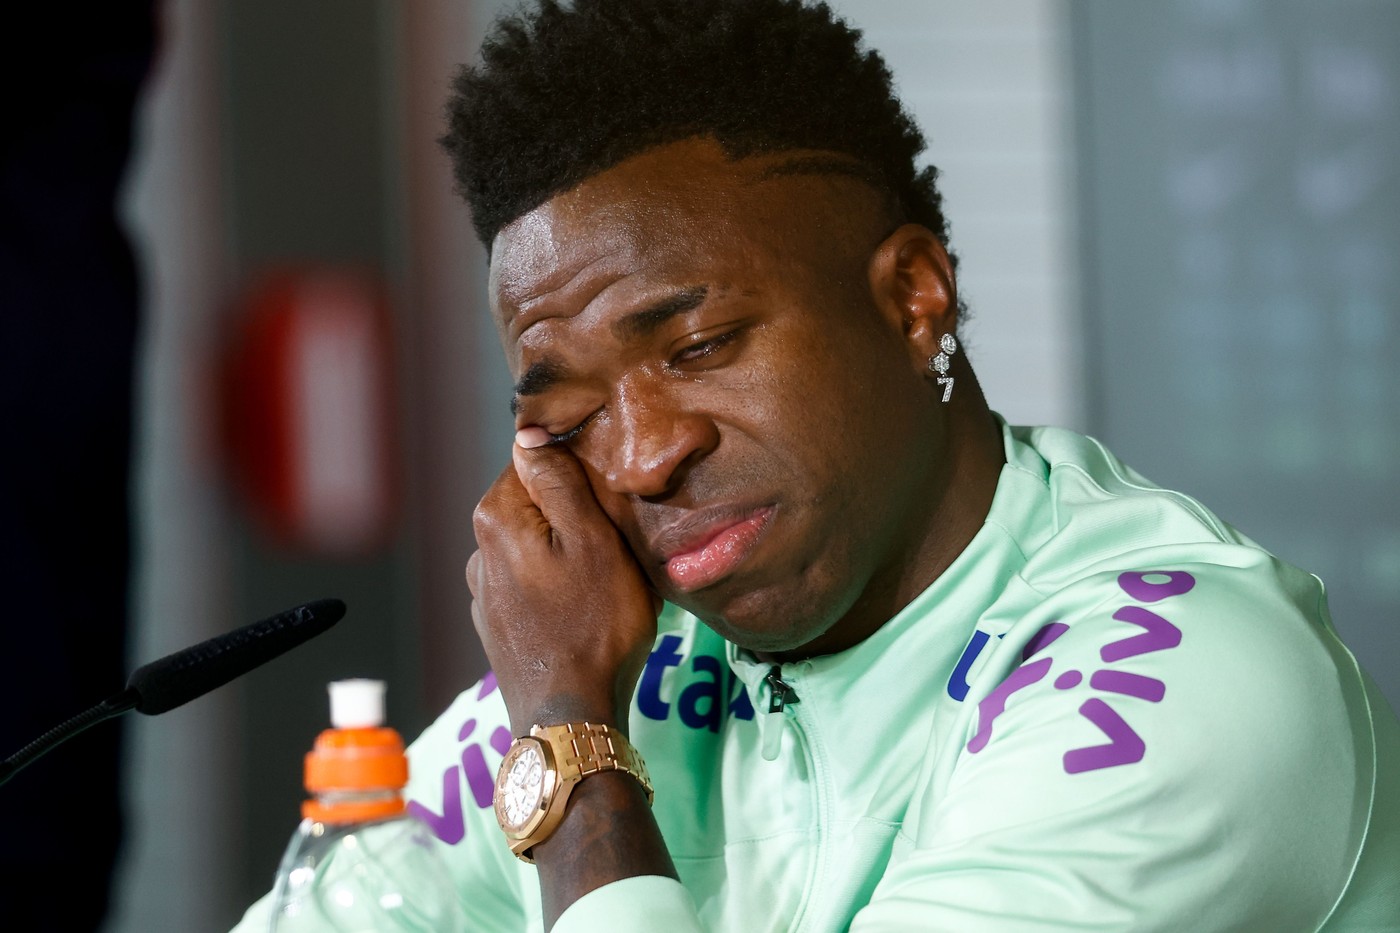 Vinicius Junior breaks down to cry during his press conference during the training session of Brazil Team prior the friendly match against Spain at Ciudad Deportiva Real Madrid on March 25, 2024, in Valdebebas, Madrid, Spain.
Vinicius Junior Press Conference - Brazil Team training session in Madrid, Valdebebas, Spain - 25 Mar 2024,Image: 859478374, License: Rights-managed, Restrictions: , Model Release: no